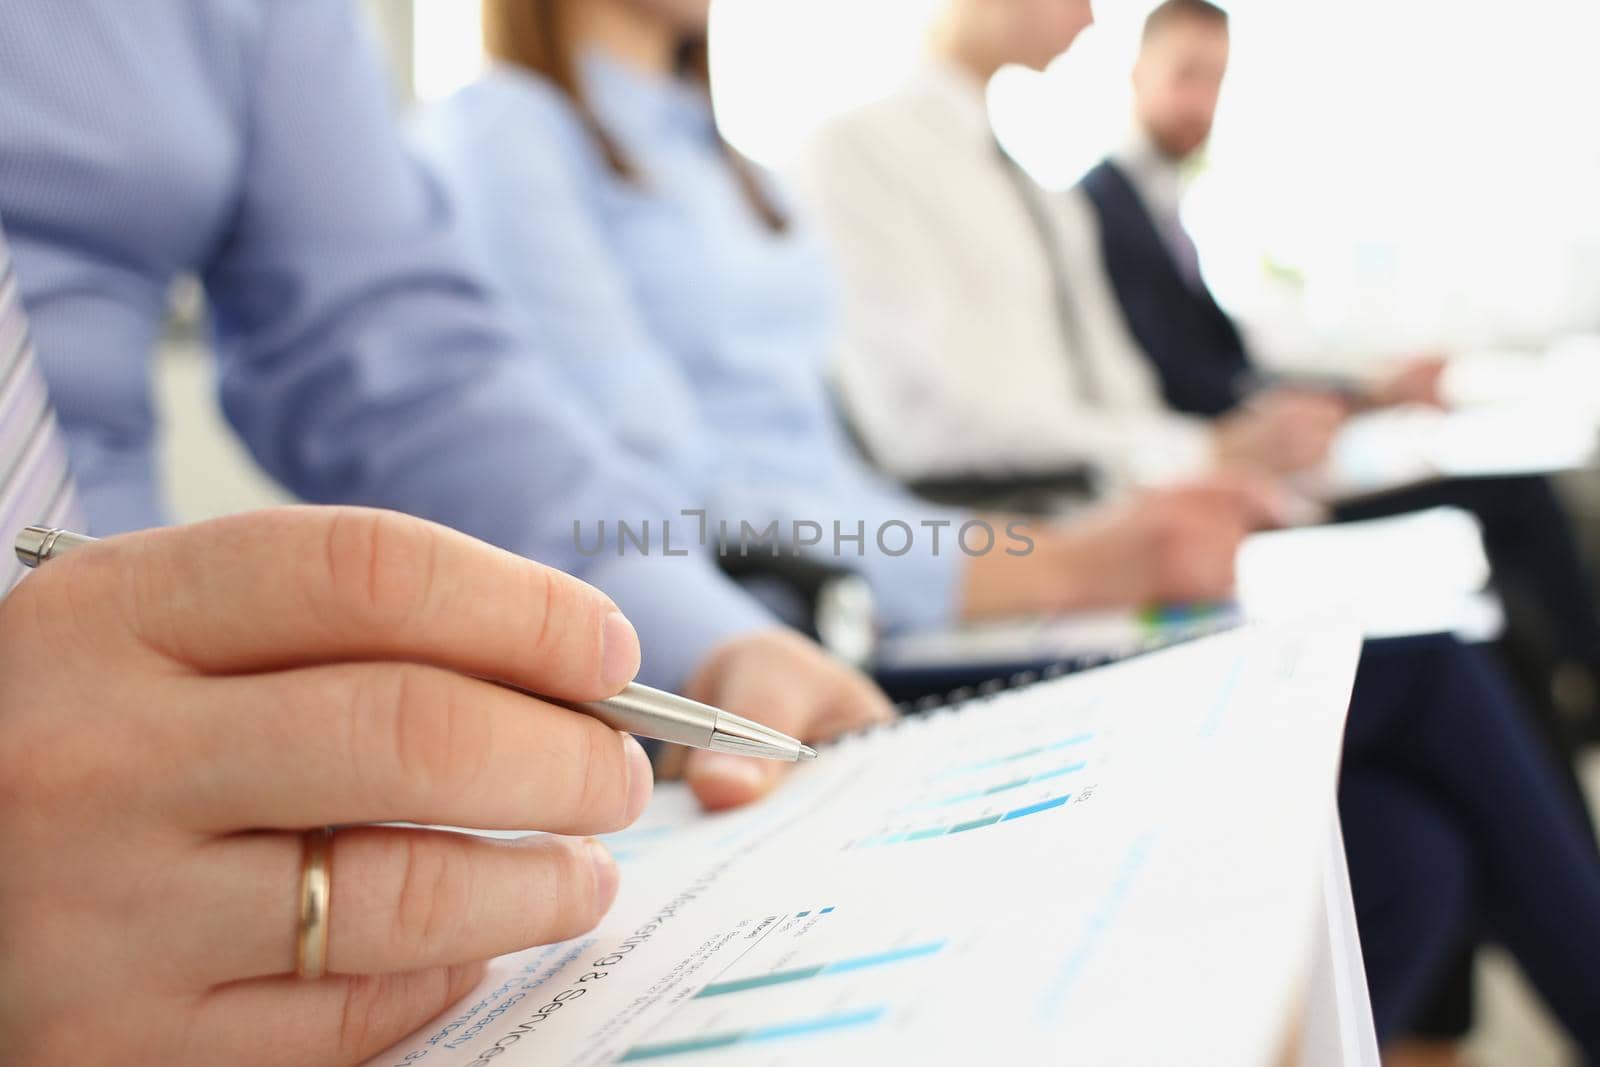 Close-up of male hand writing notes in papers on meeting, manager in conference room listen to discussion about business project. Company meeting concept